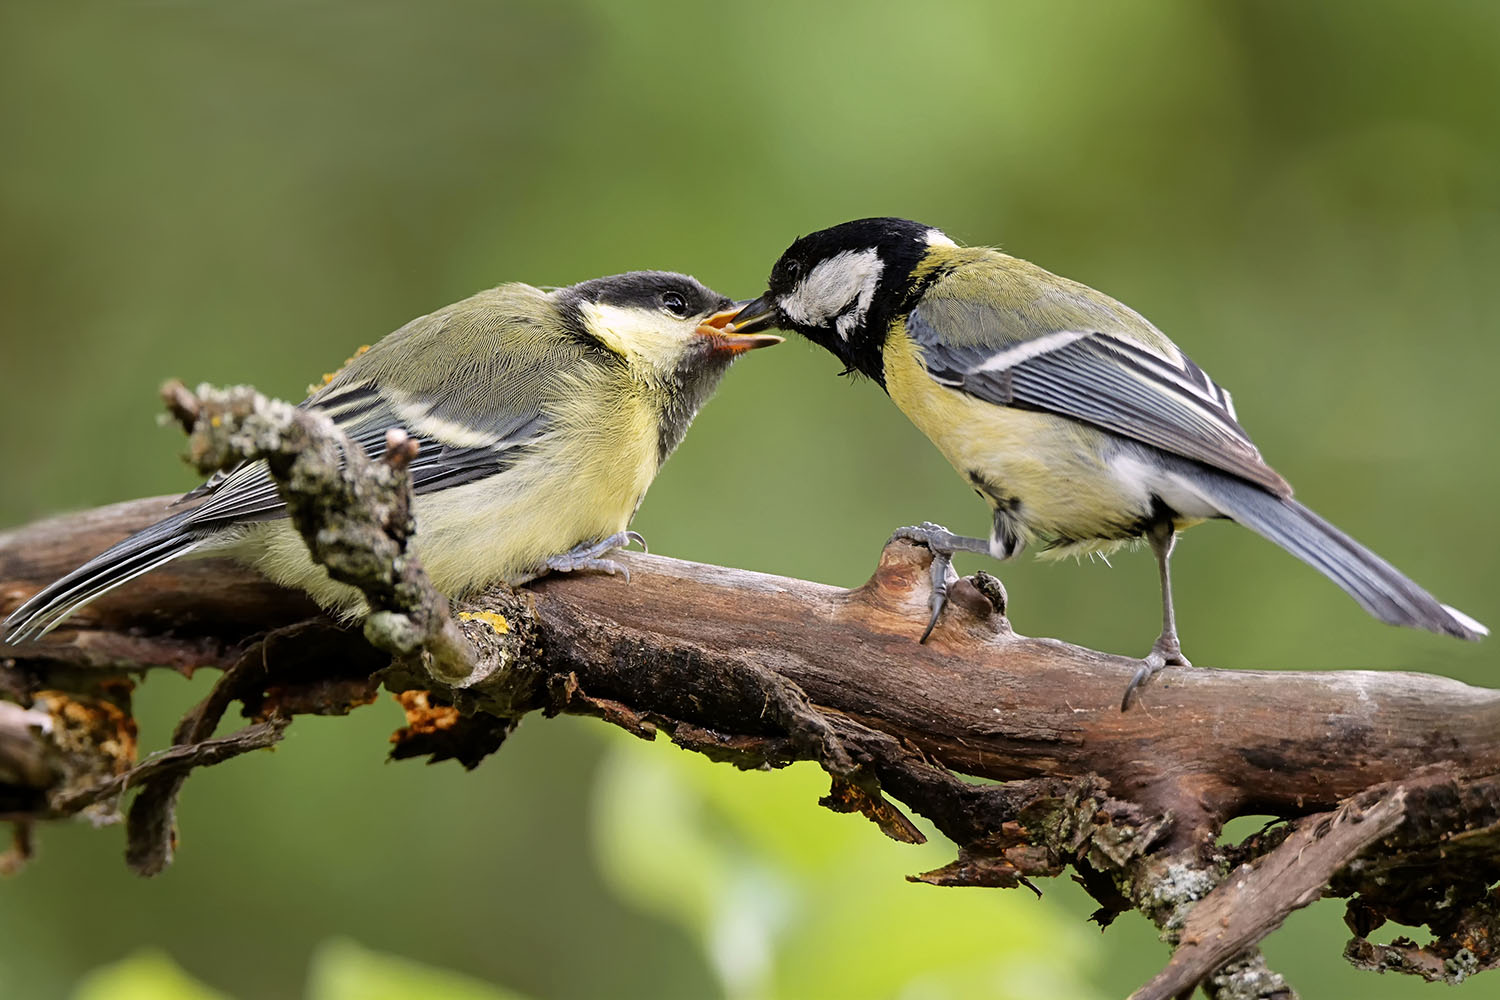 Great tit feeding its baby on branch